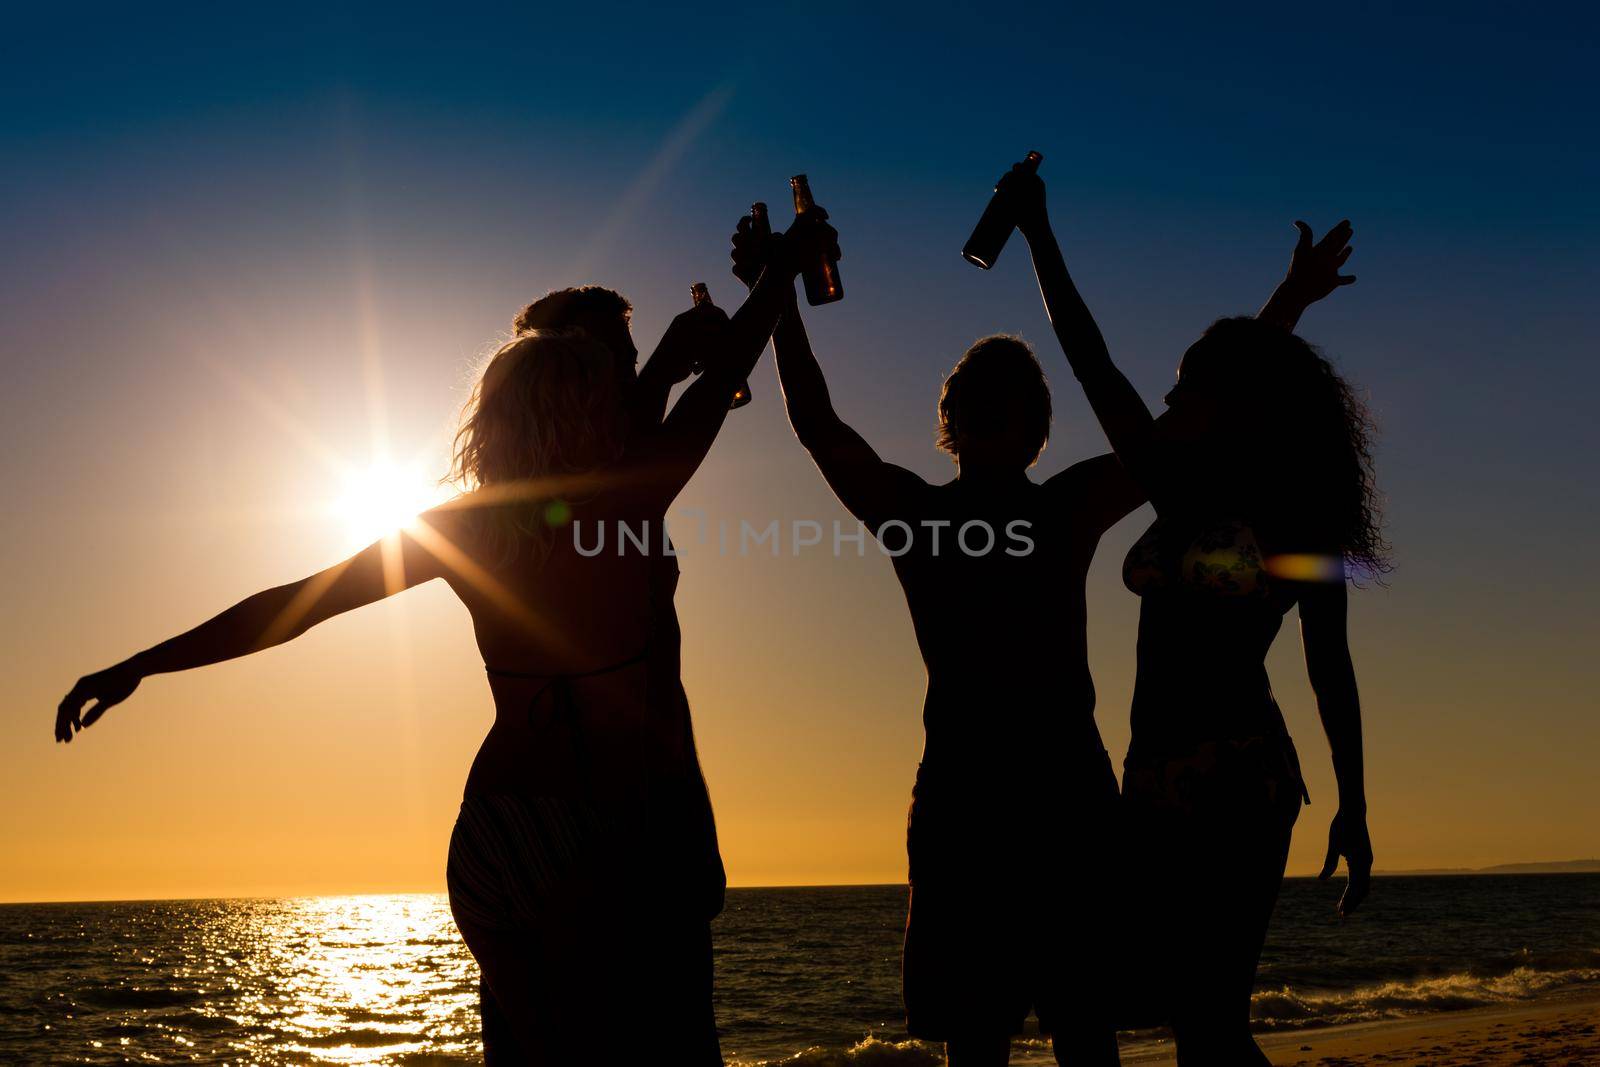 People (two couples) on the beach having a party, drinking and having a lot of fun in the sunset (only silhouette of people to be seen, people having bottles in their hands with the sun shining through)